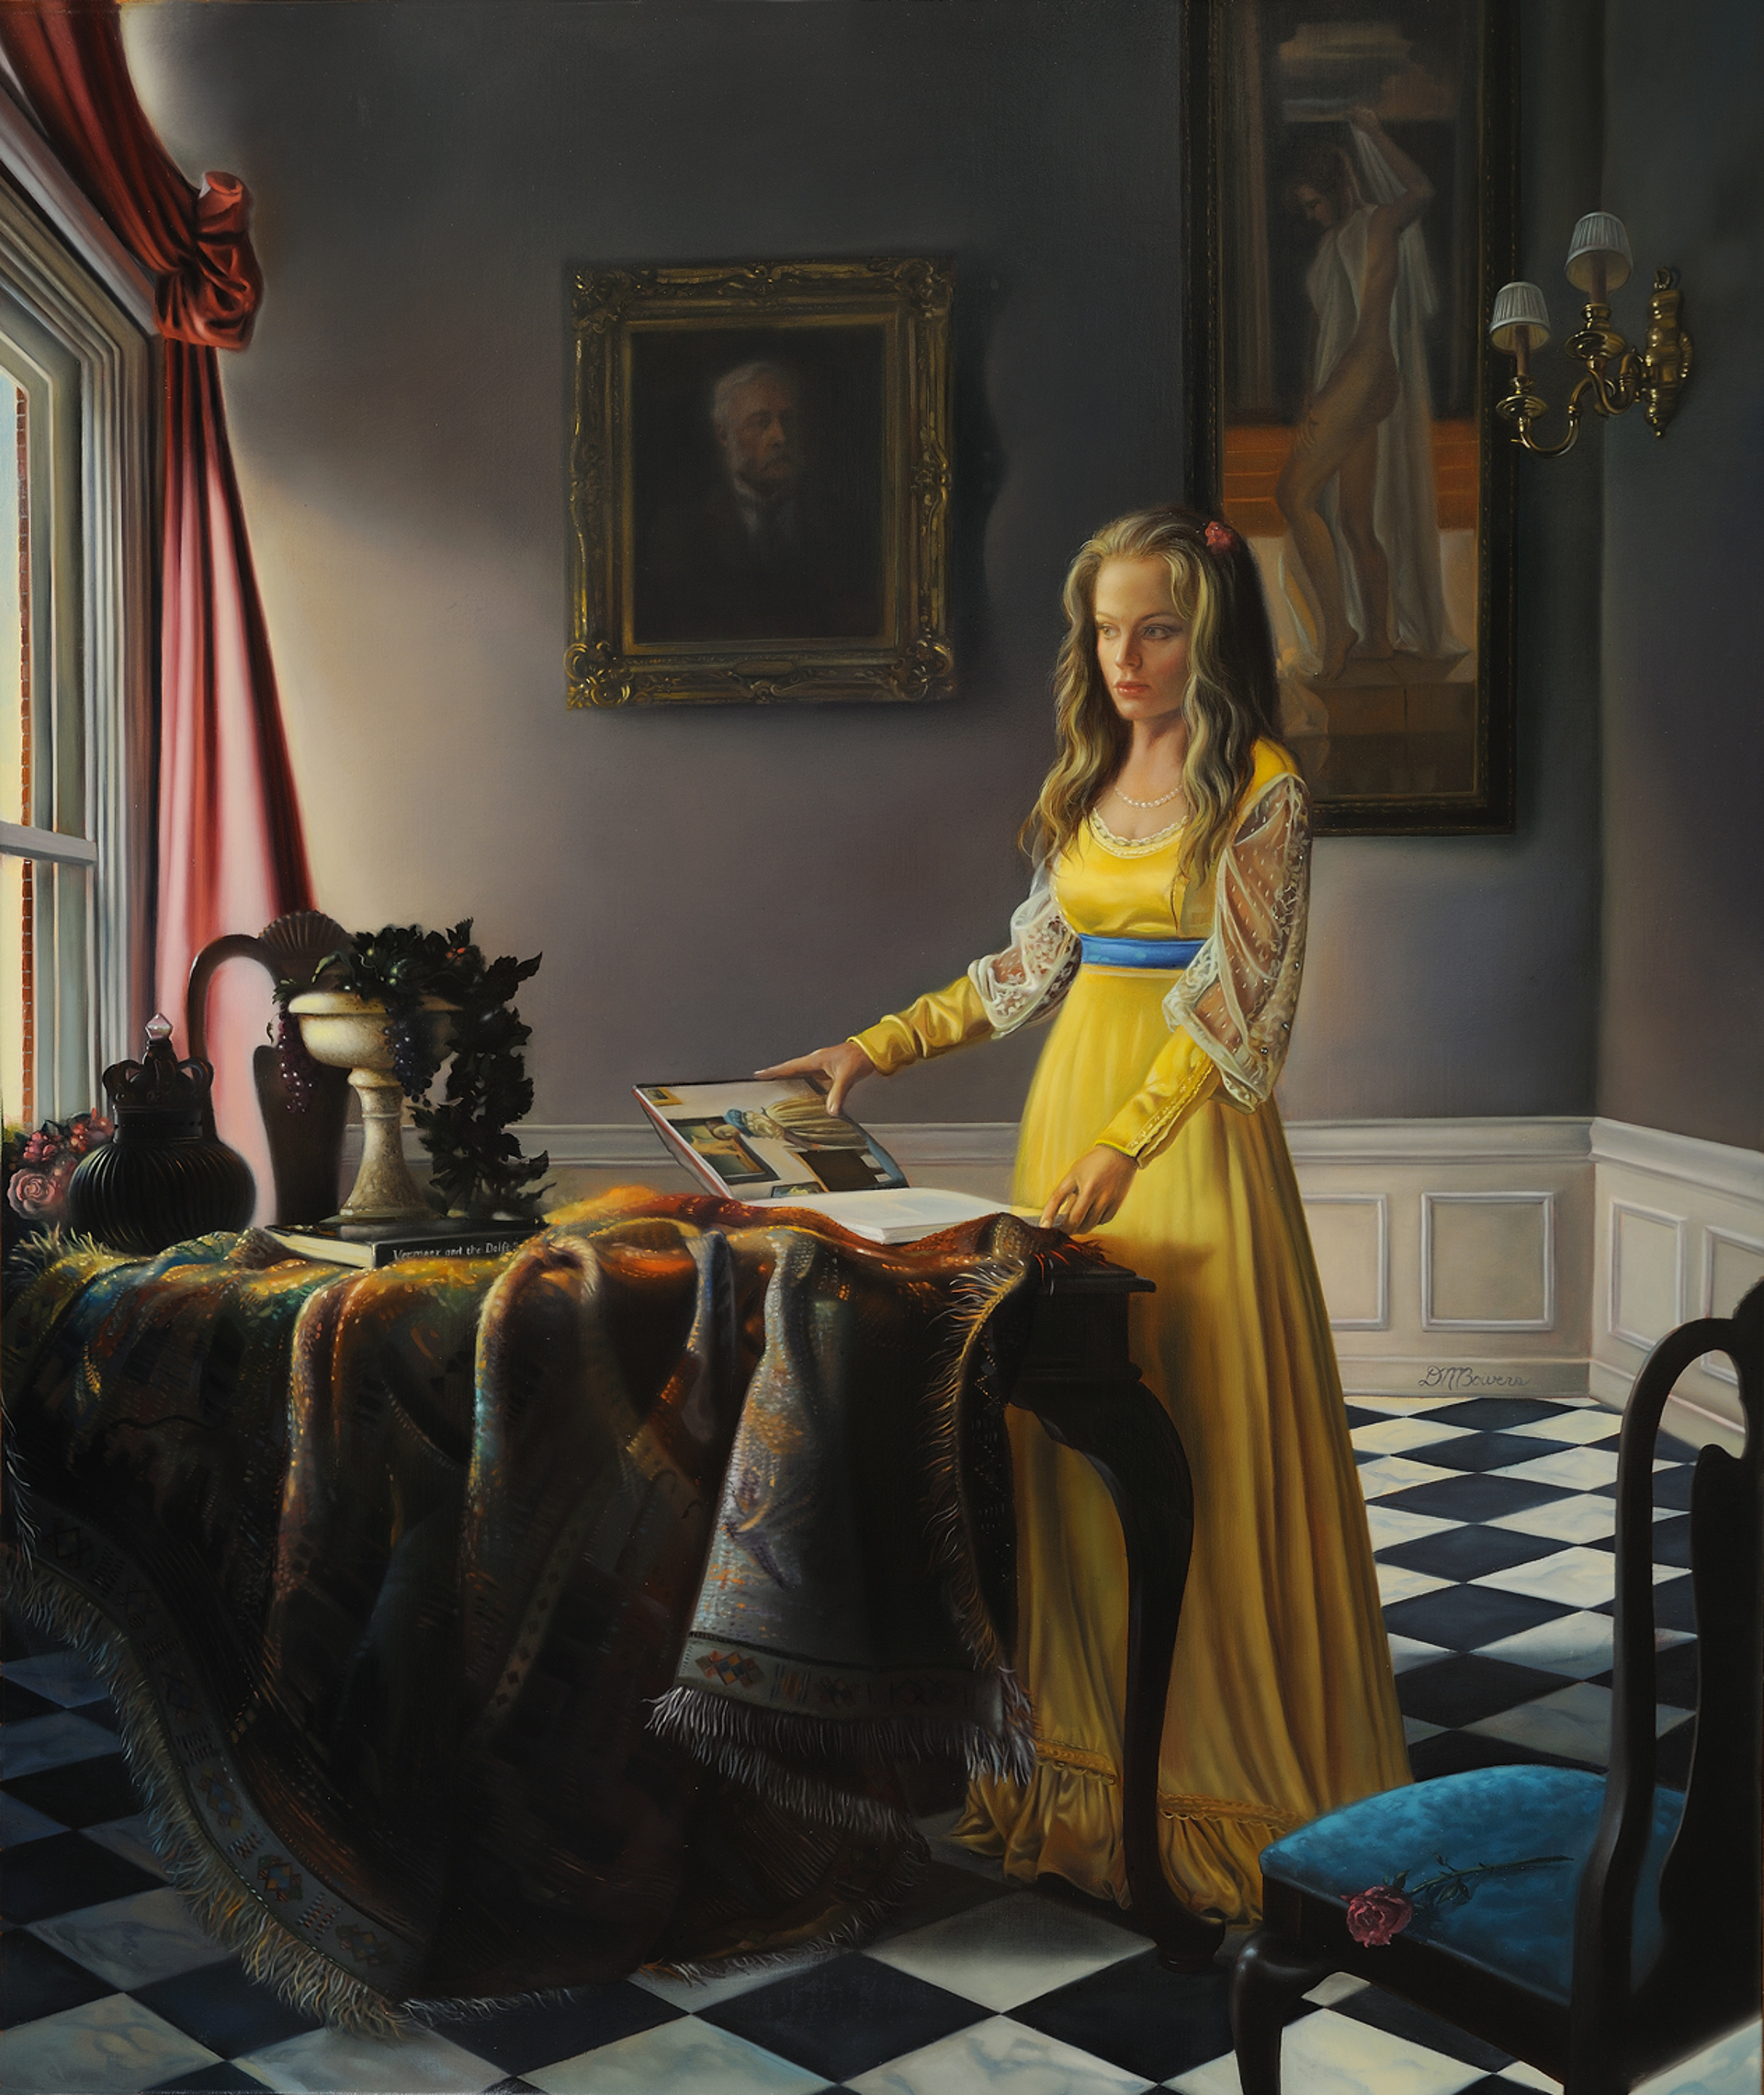 Face the Light by David Michael Bowers